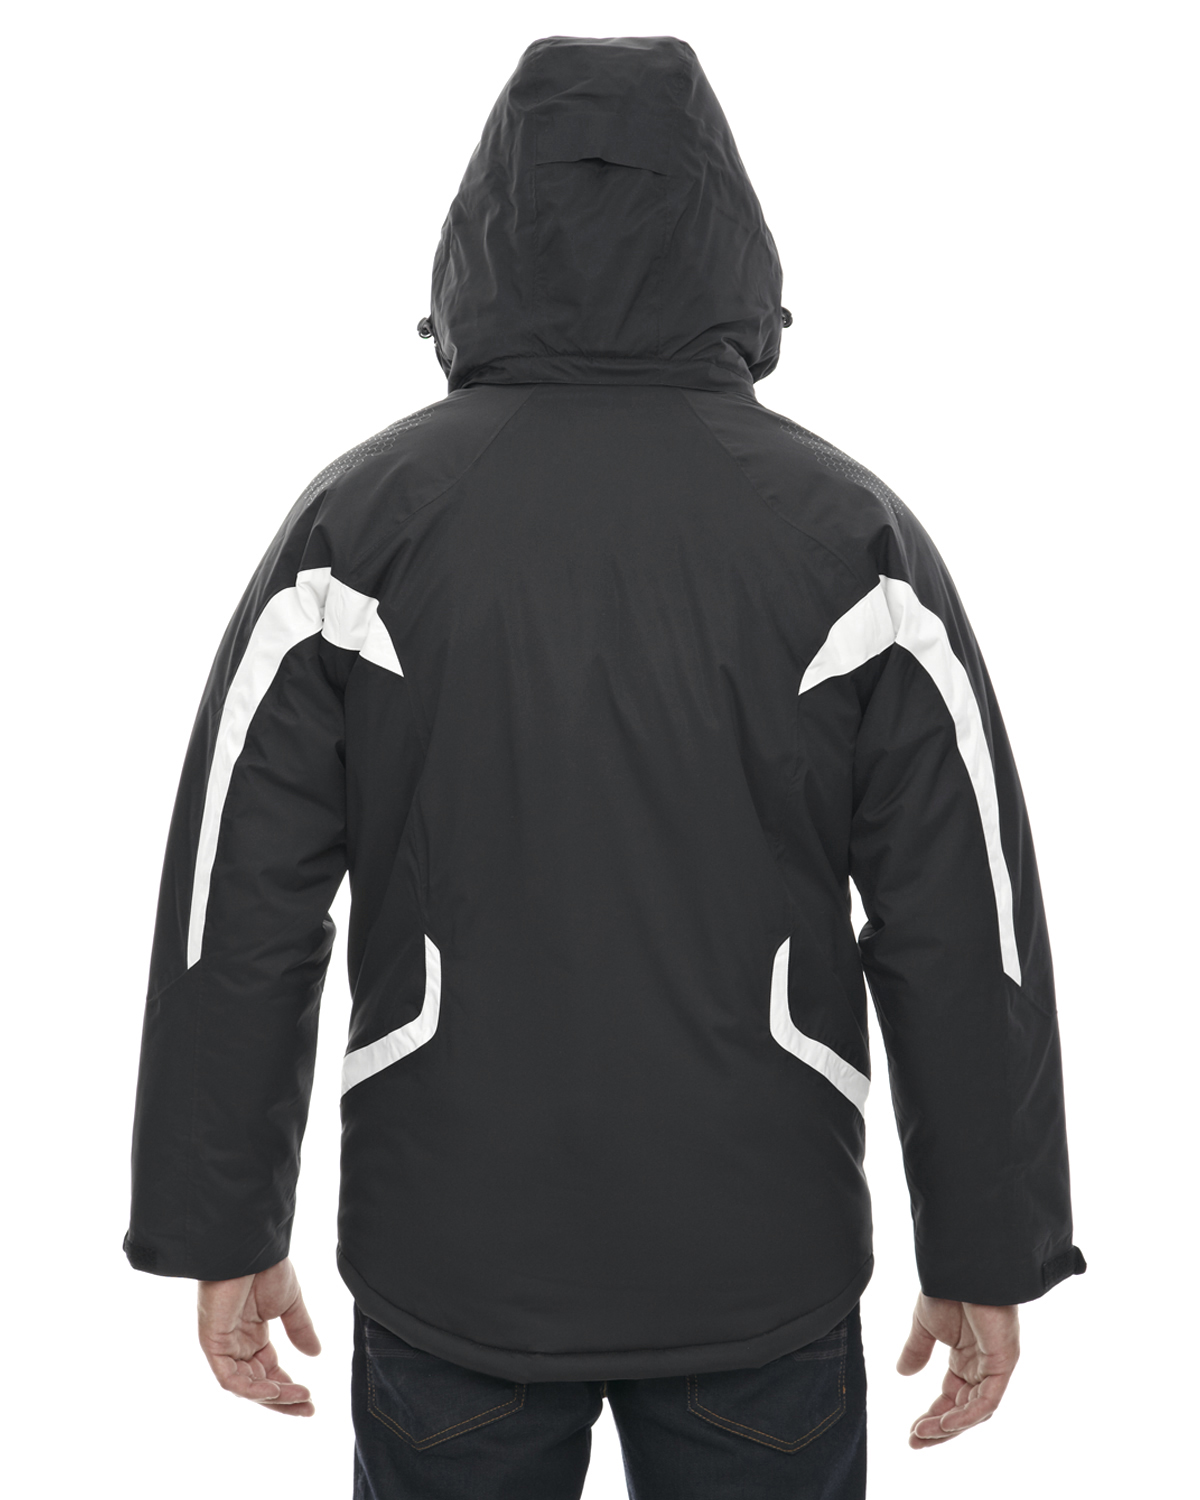 A Product of Ash City - North End Men's Apex Seam-Sealed Insulated Jacket - BLACK 703 - L [Saving and Discount on bulk, Code Christo] - image 2 of 2